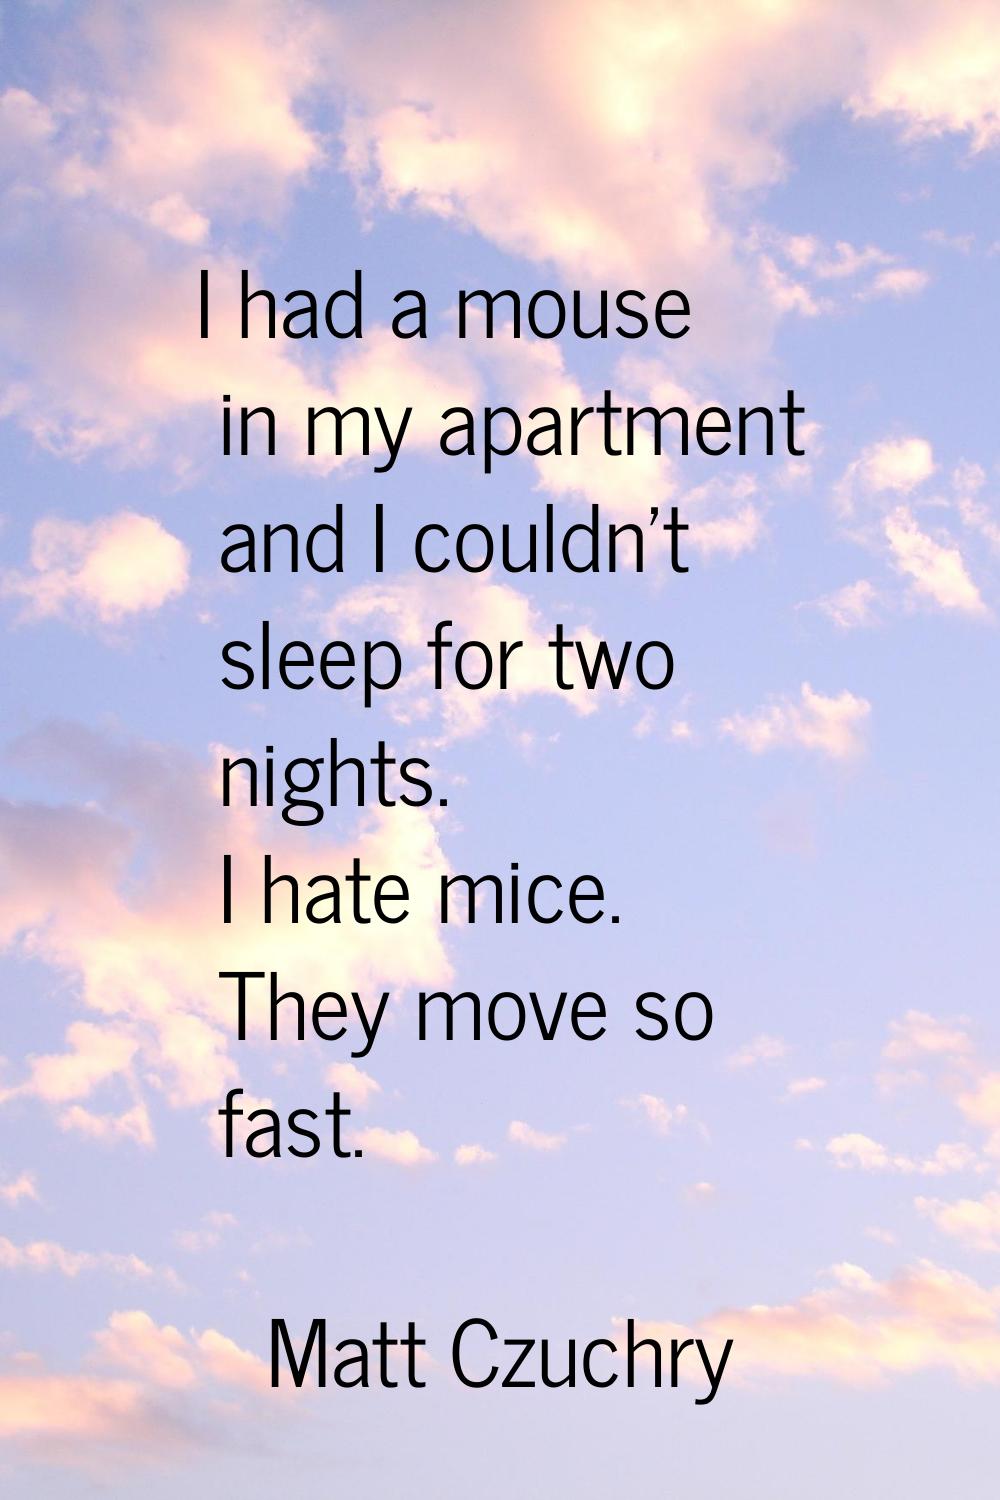 I had a mouse in my apartment and I couldn't sleep for two nights. I hate mice. They move so fast.